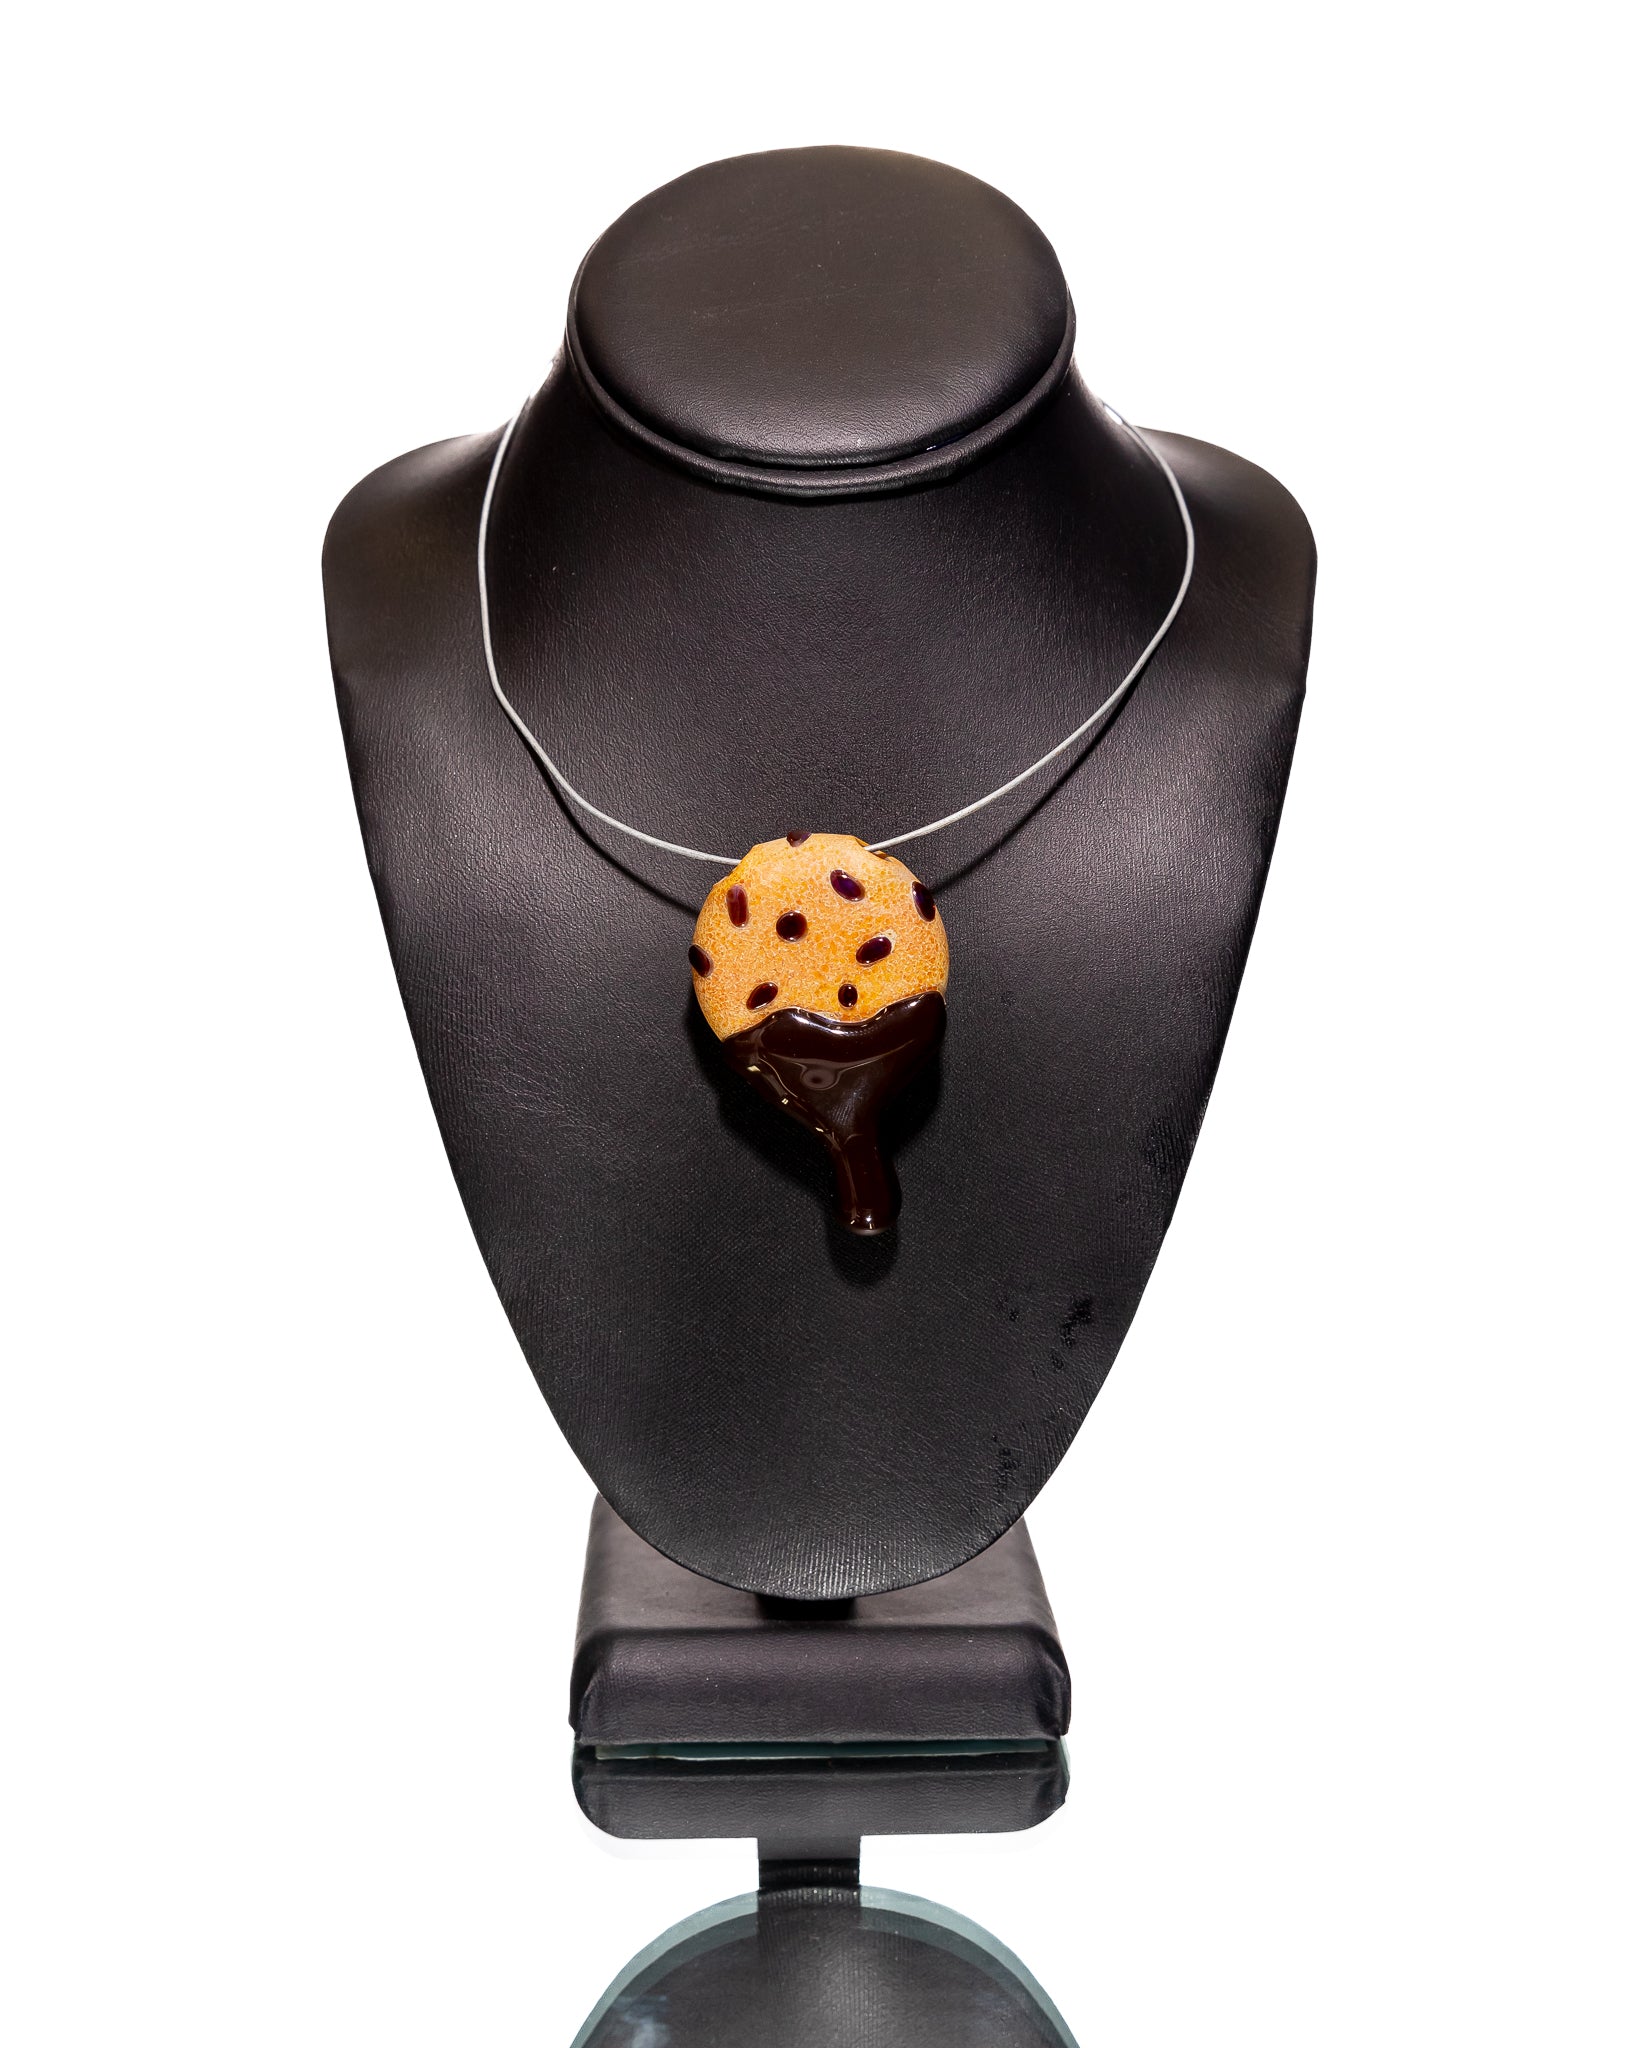 Rob Morrison Glass - Chocolate Covered Cookie Pendant